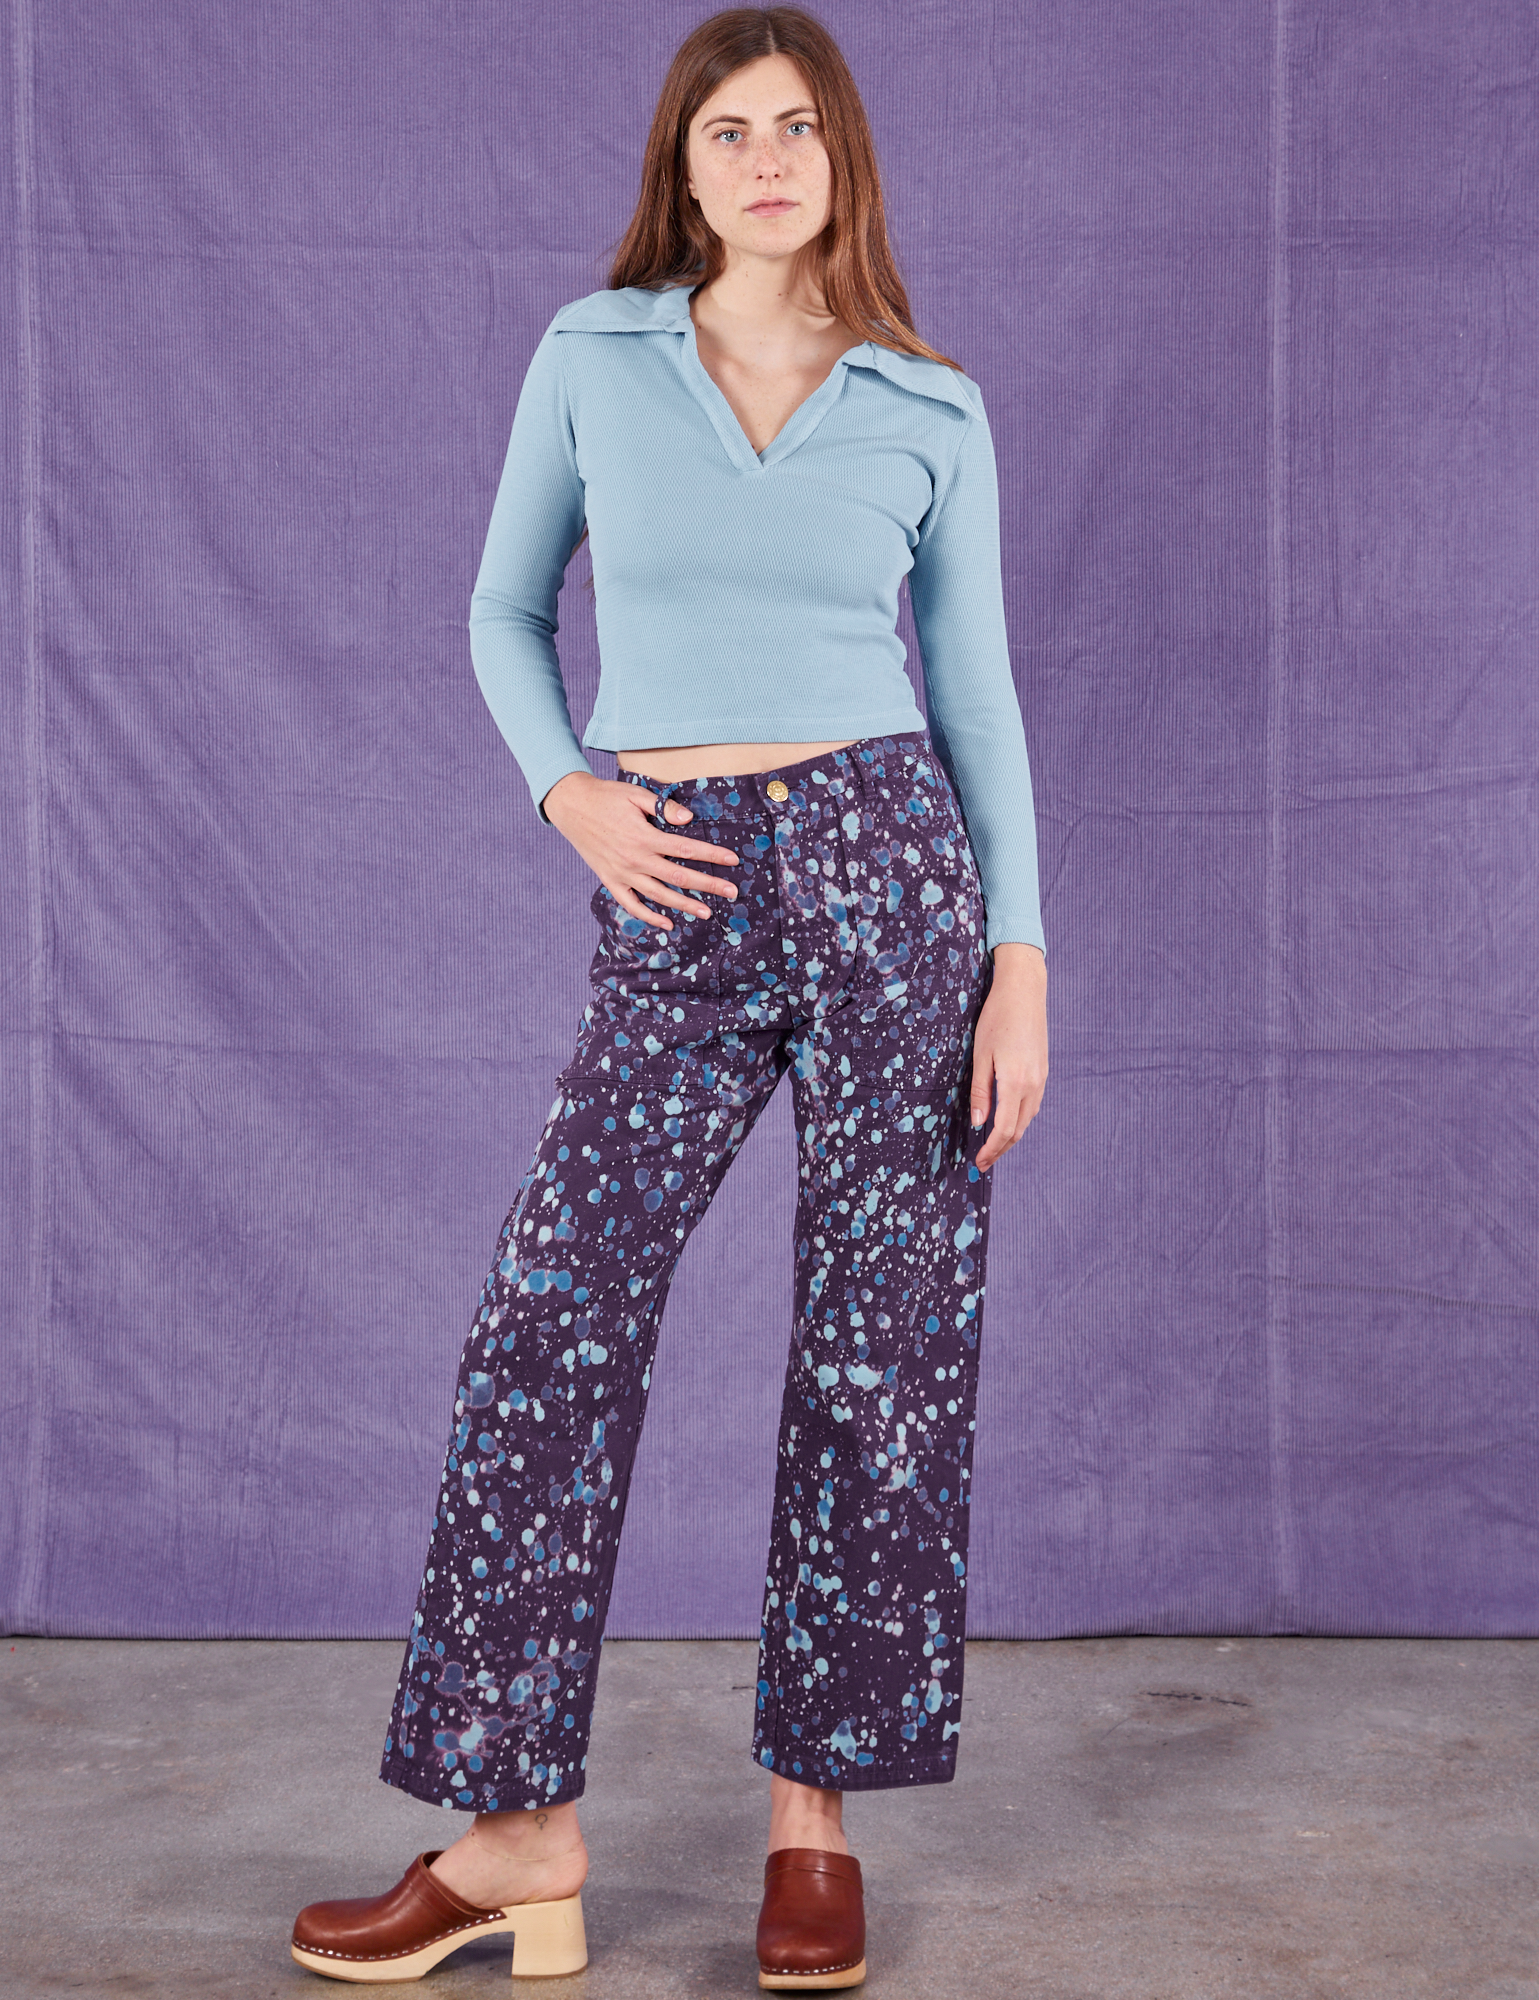 Scarlett is 5&#39;9&quot; and wearing XS Marble Splatter Work Pants in Nebula Purple paired with baby blue Long Sleeve Fisherman Polo